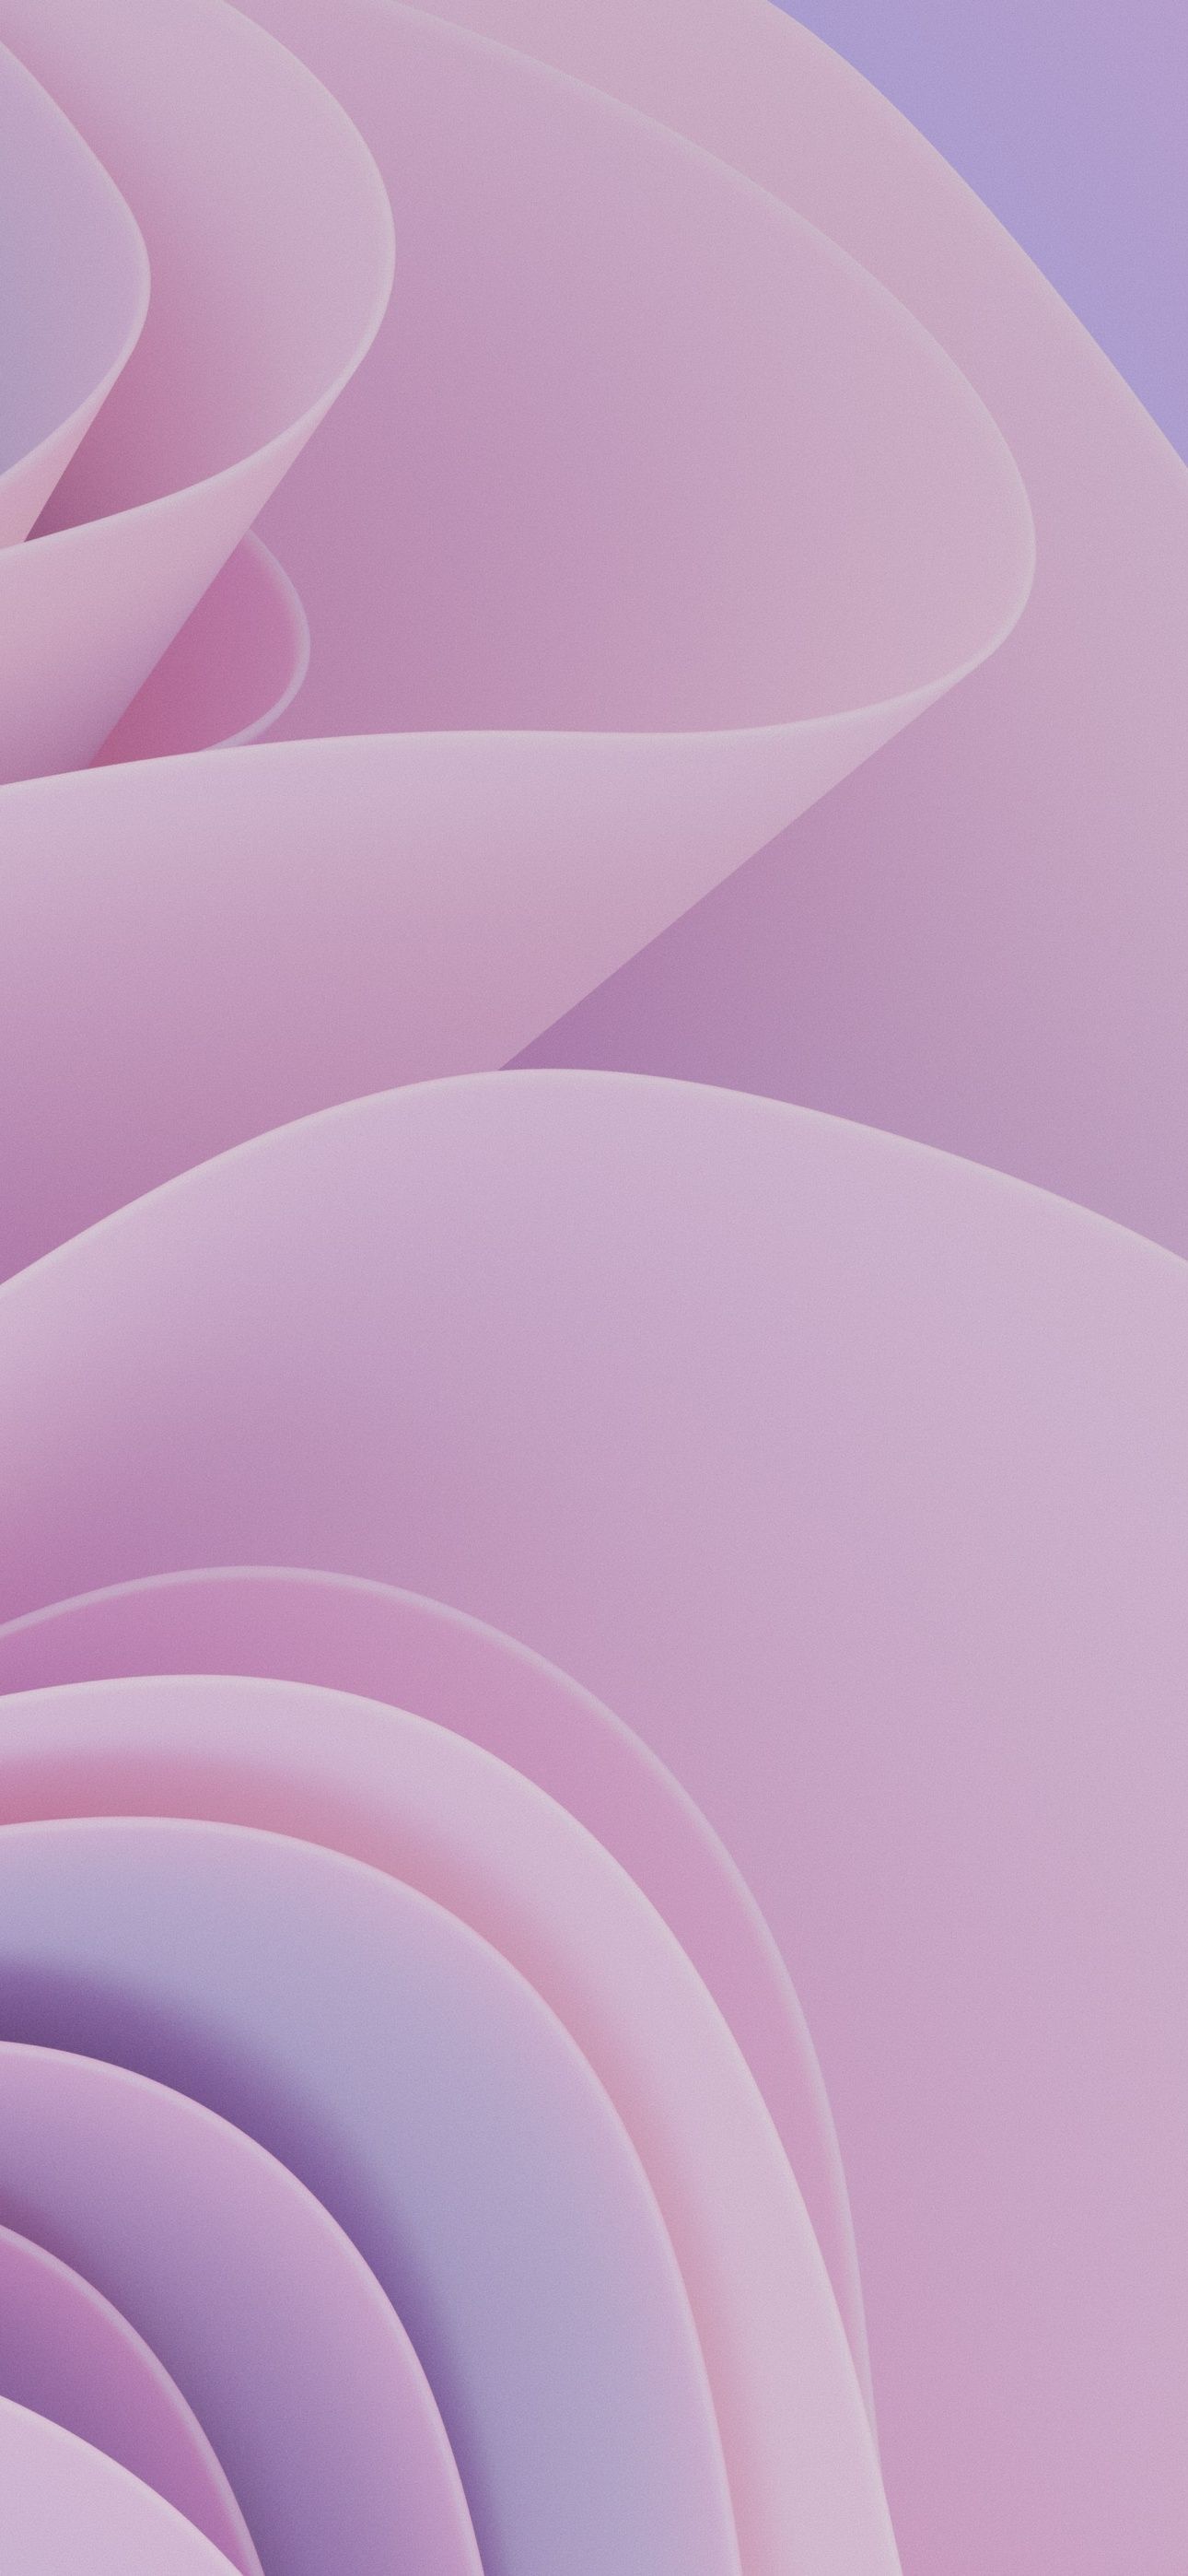 Download the official Samsung Galaxy S20 wallpapers here - Wave, pattern, abstract, 3D